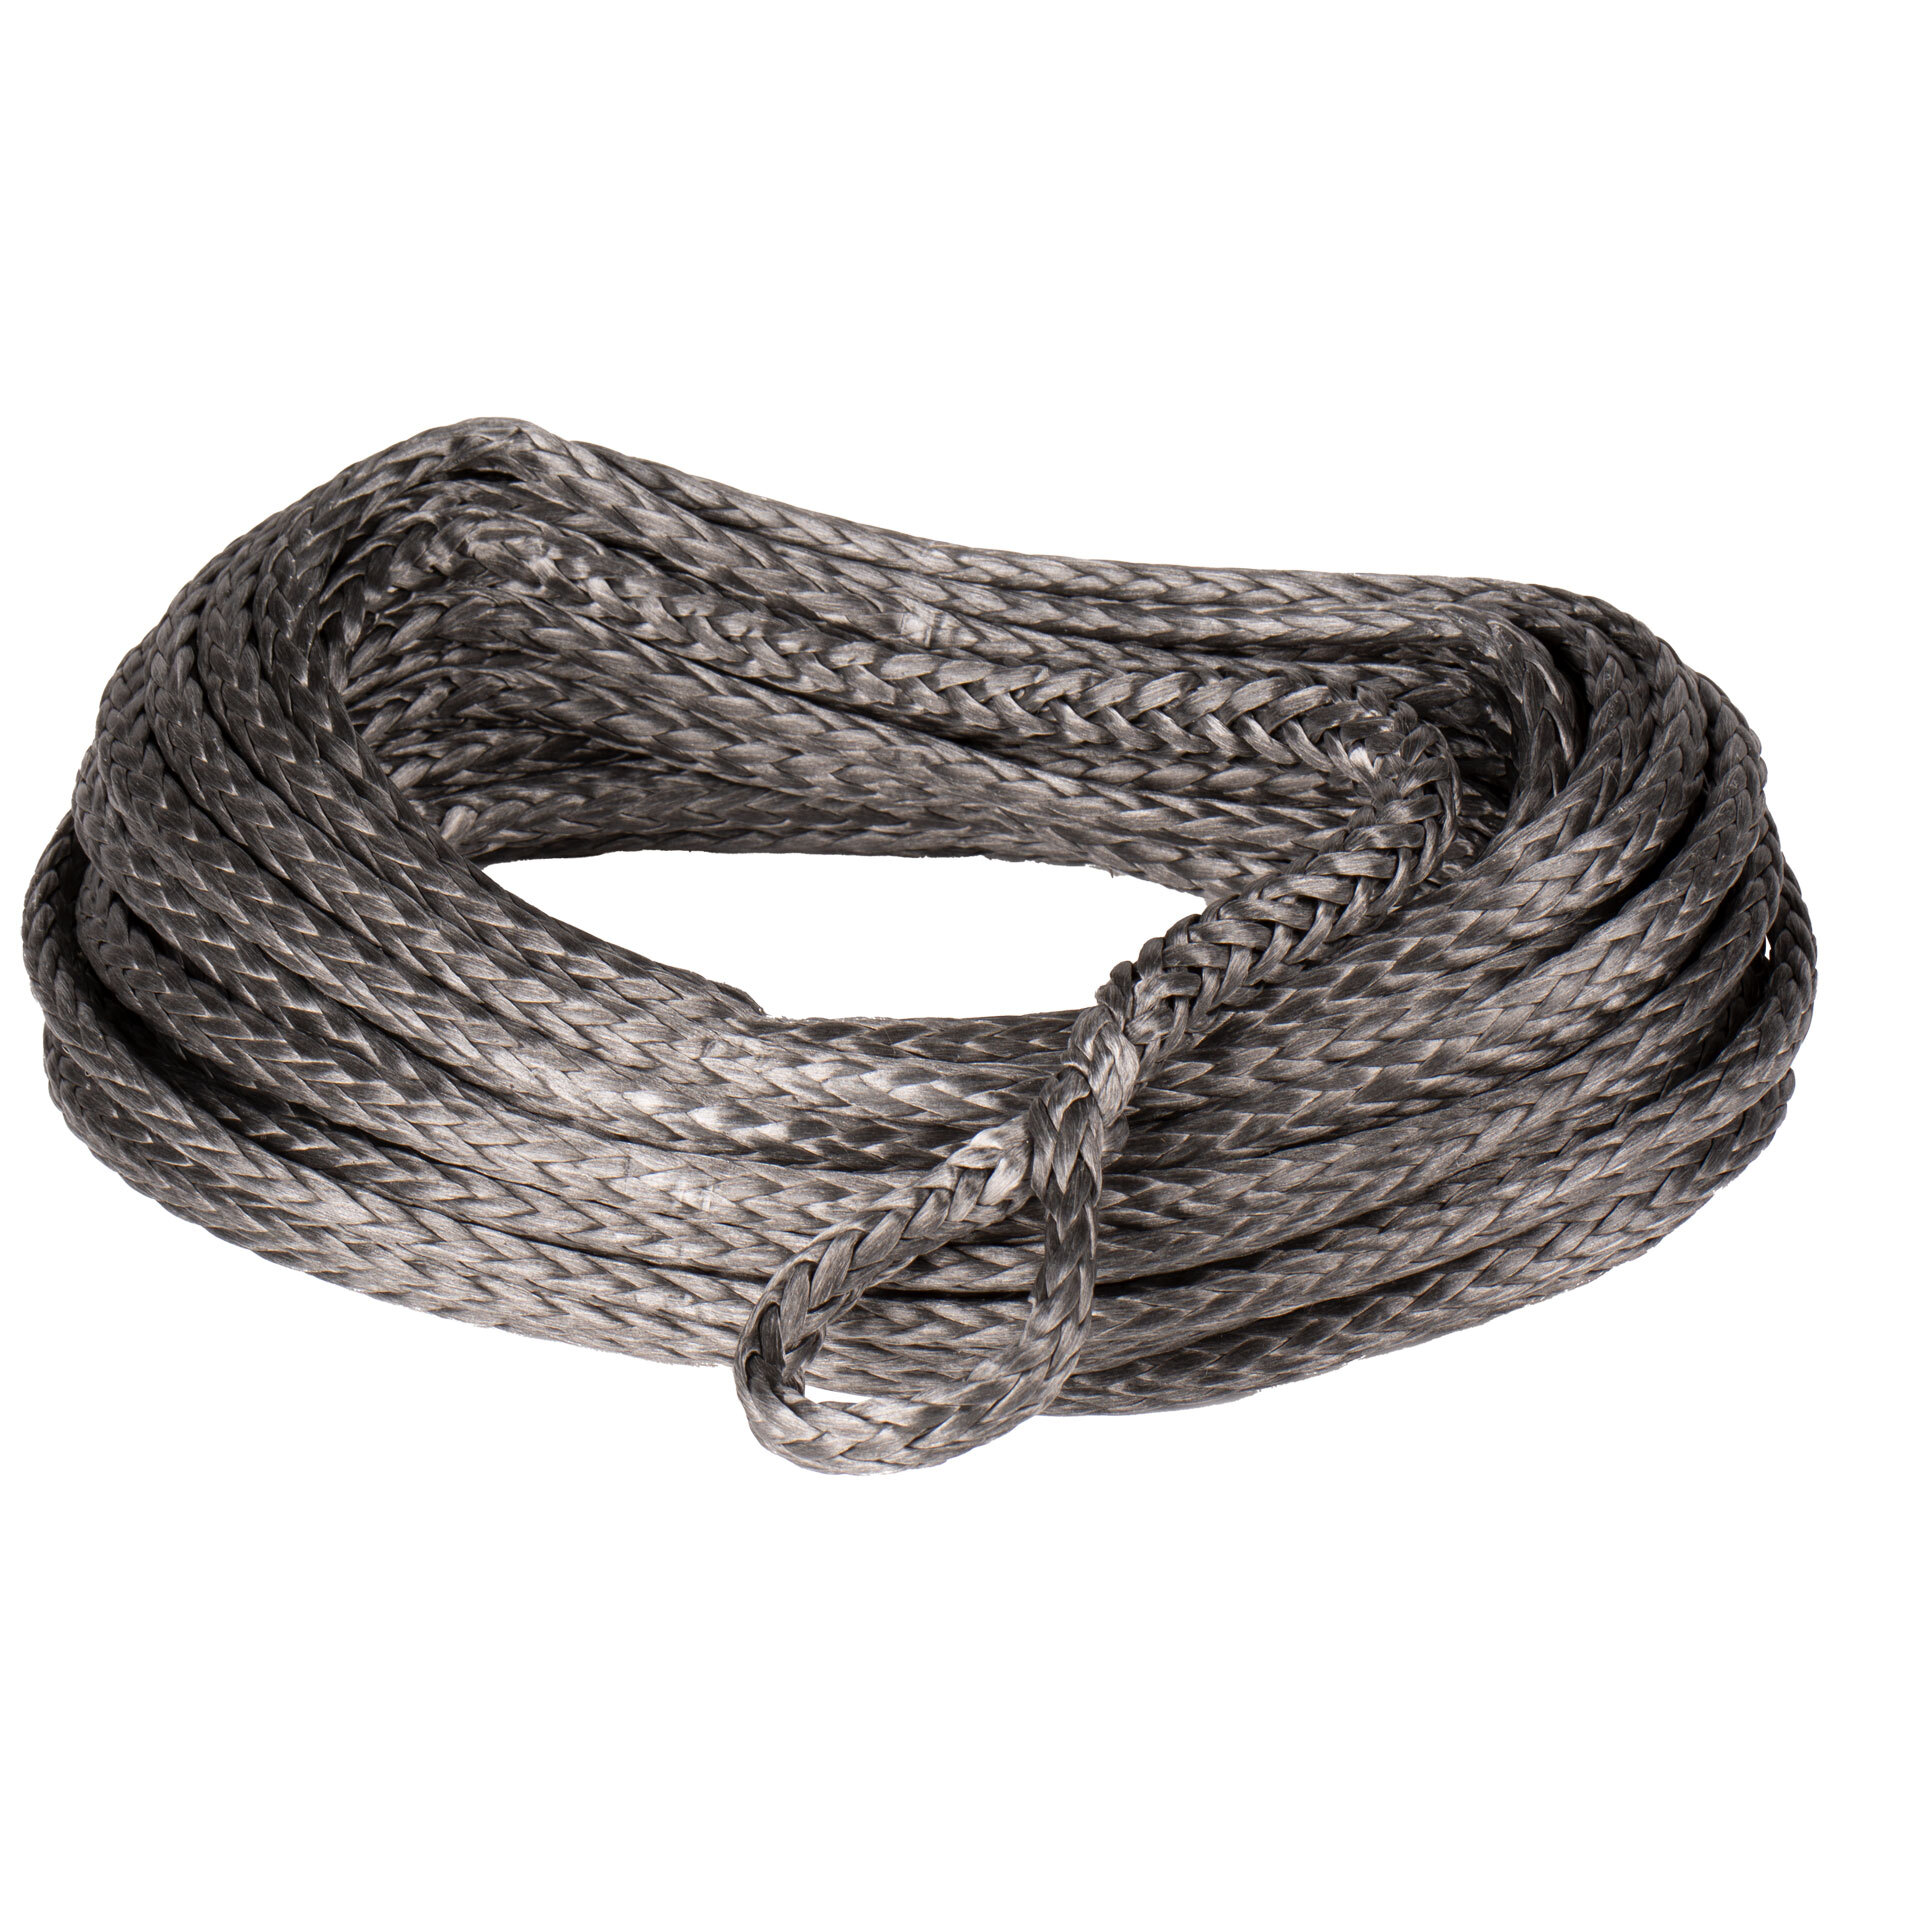 WARN® 4500 lb Synthetic Rope